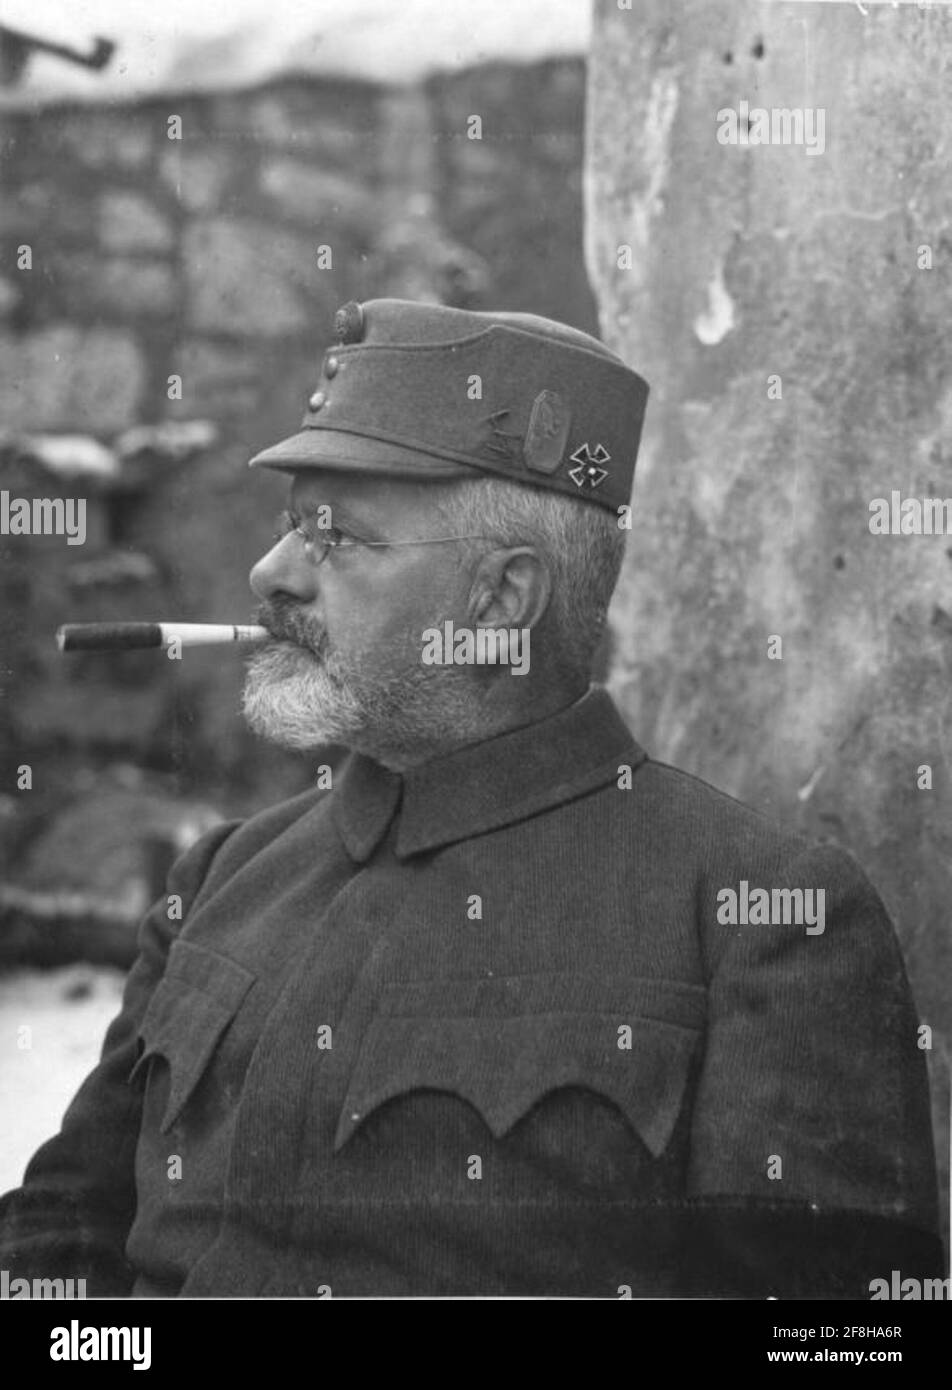 Kugy, Julius Portrait with hat; cigar in mouth. Stock Photo